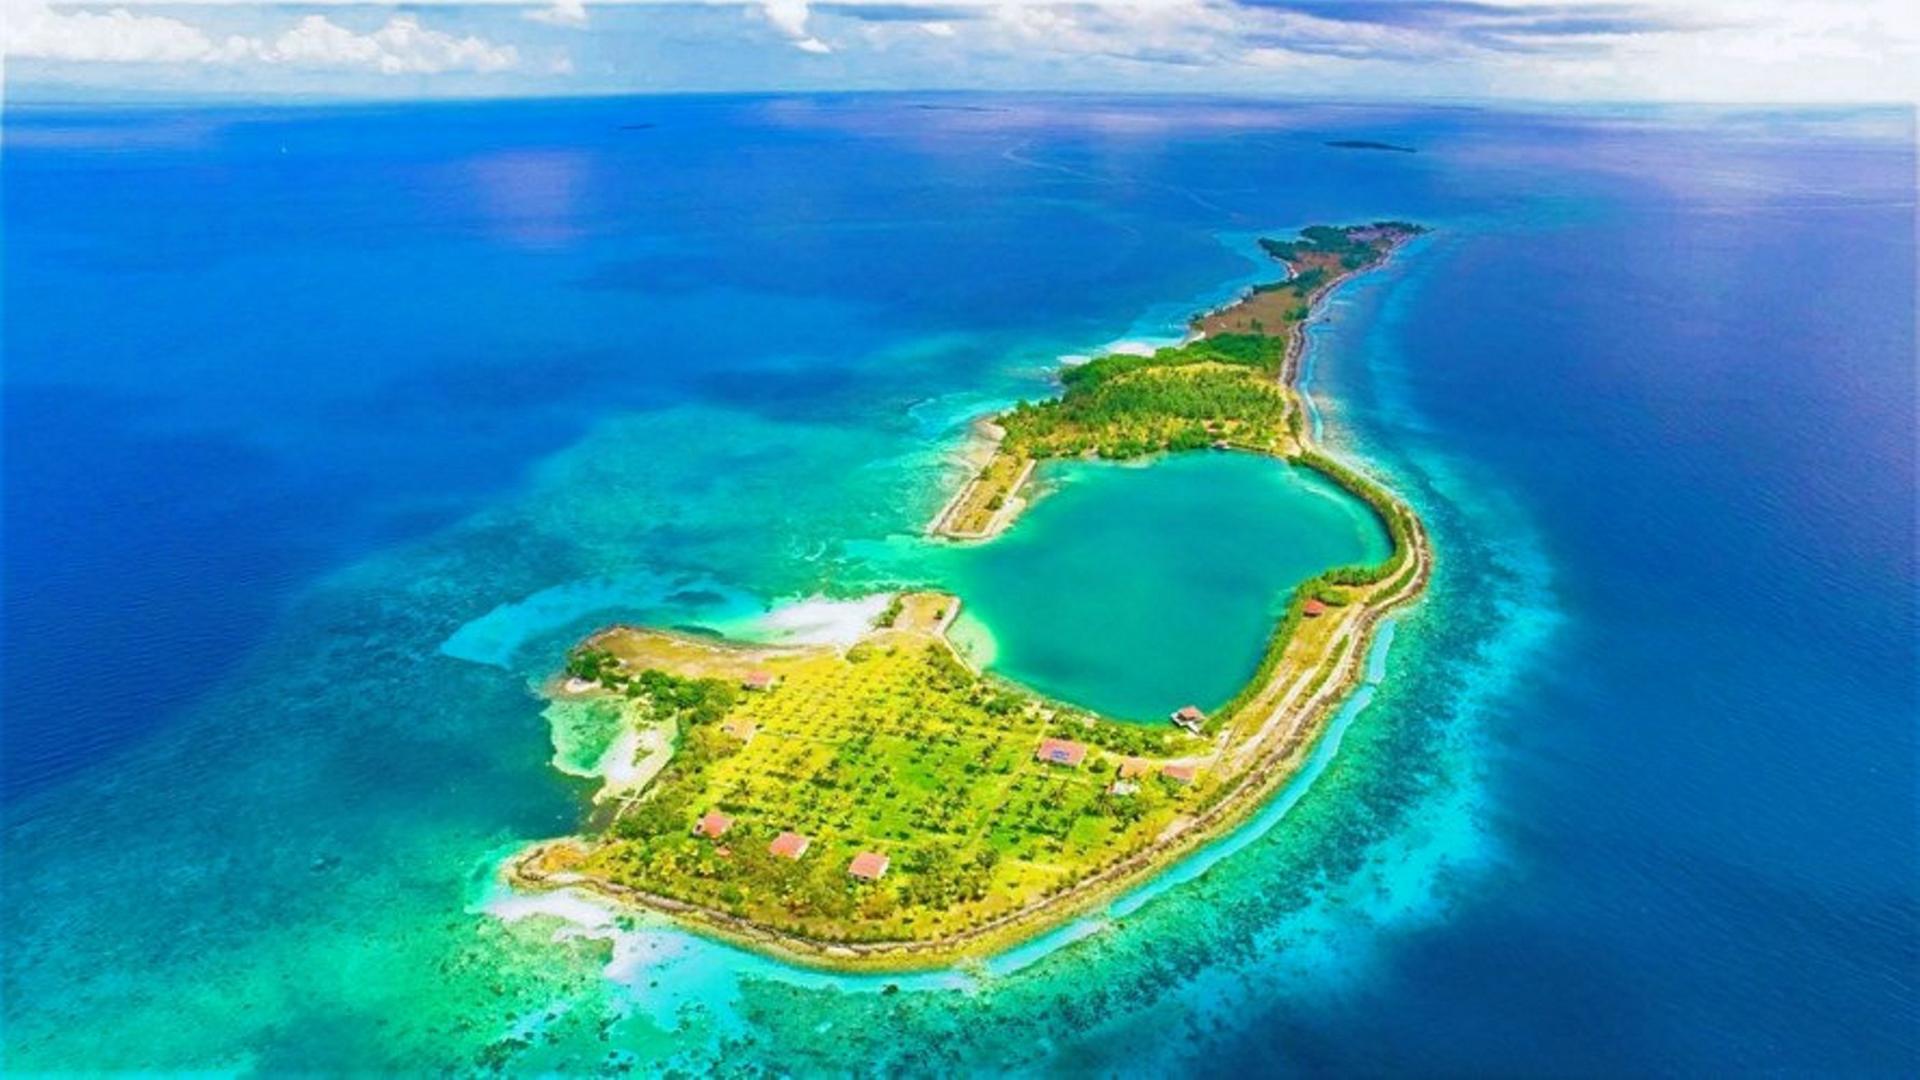 Private Islands For Sale Worldwide